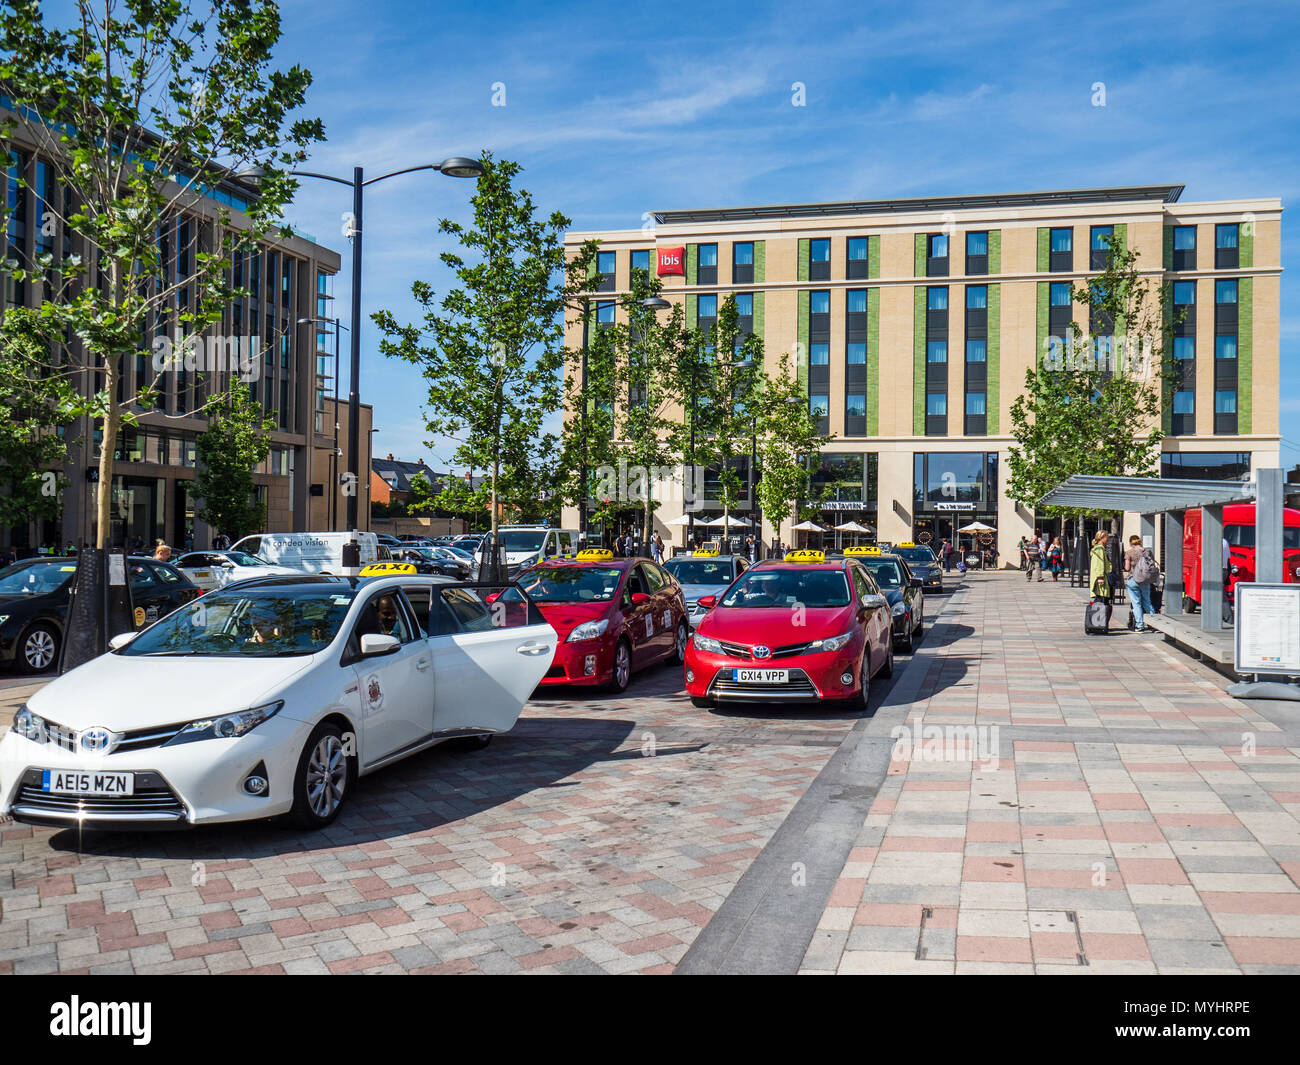 Taxis in front of Cambridge Station in the new Station Redevelopment at Station Square Stock Photo